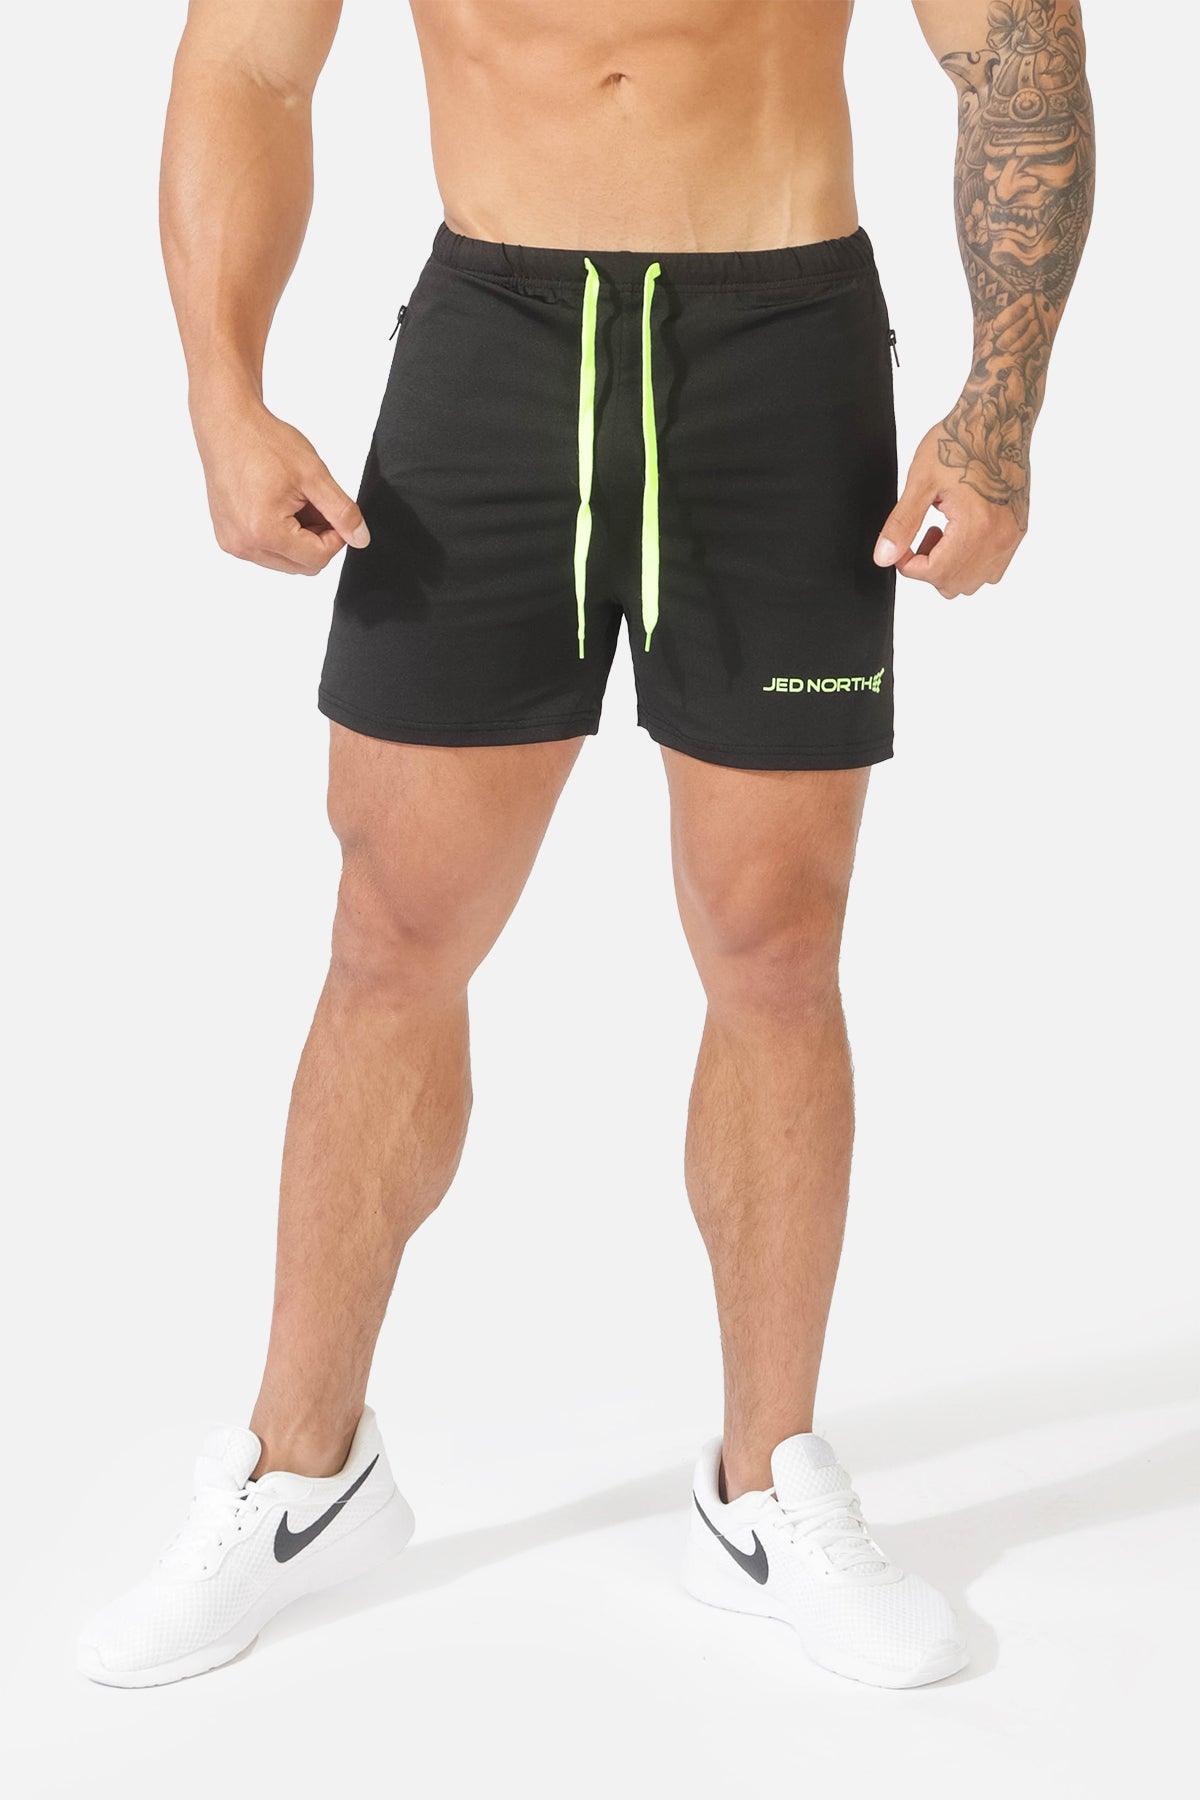 Jed North Men's Fitted Shorts Bodybuilding Workout Gym Running